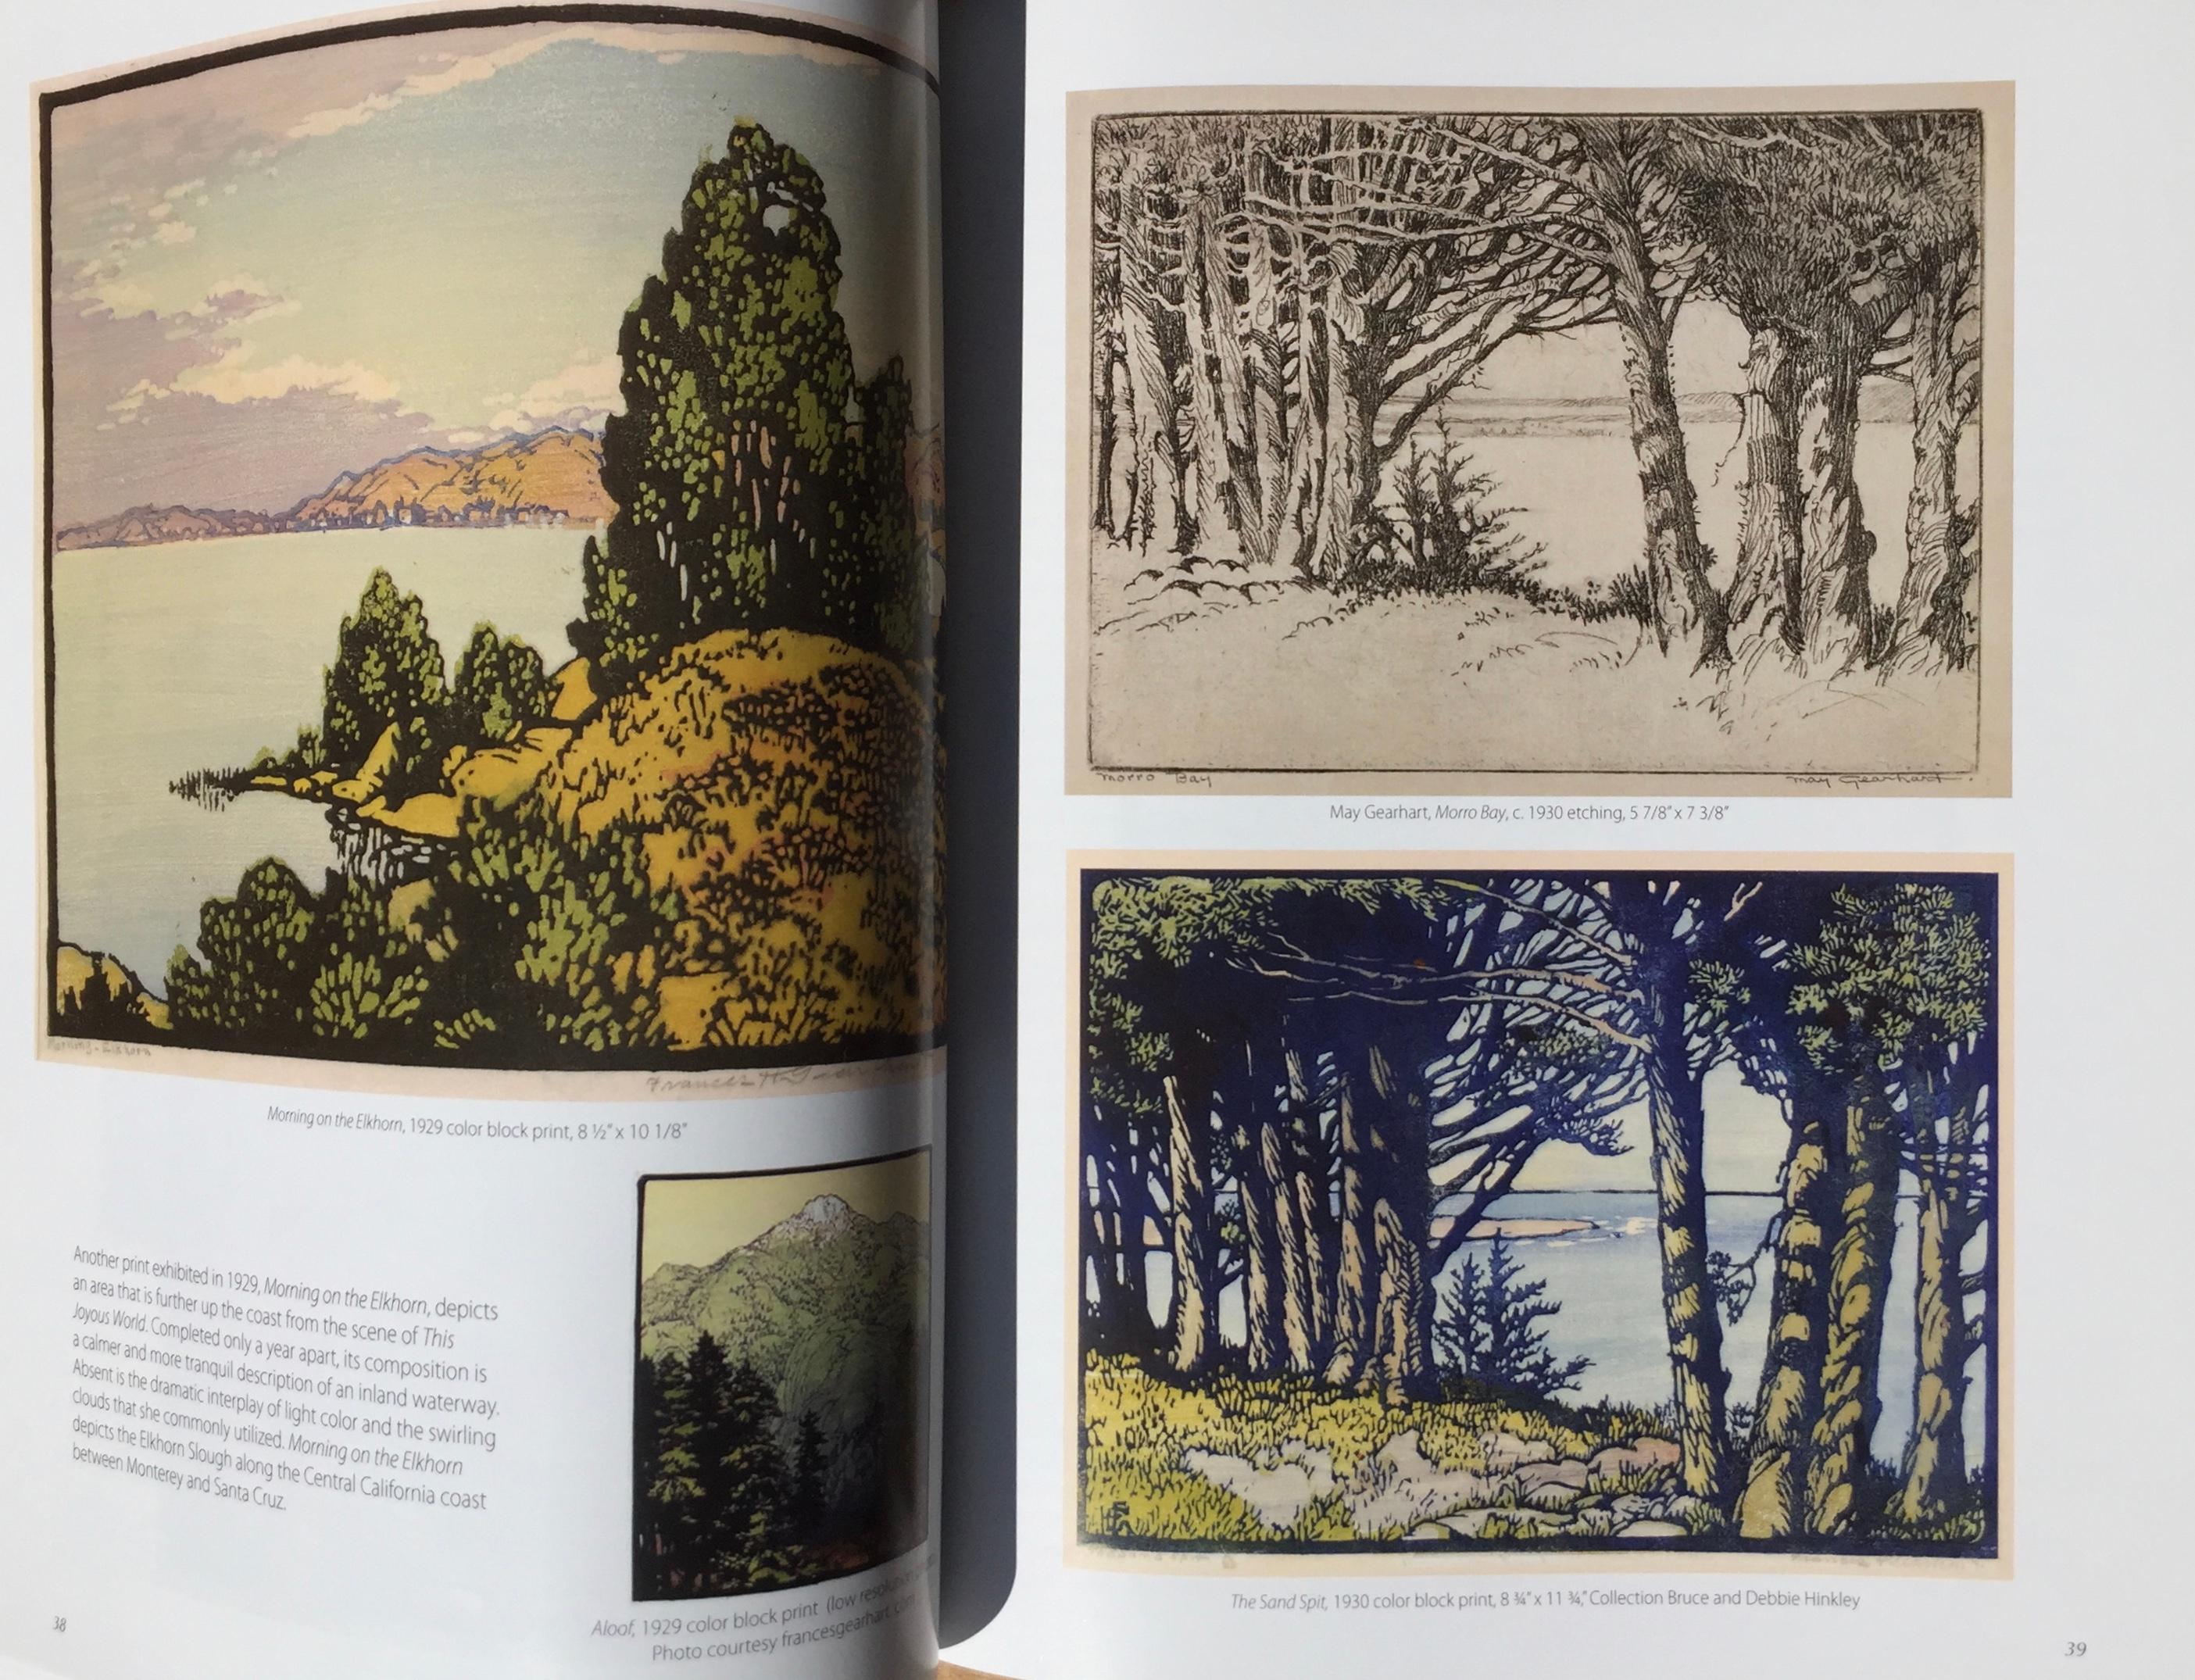 FRANCES H. GEARHART  (1869-1958)
Just published catalog to accompany the Exhibition 